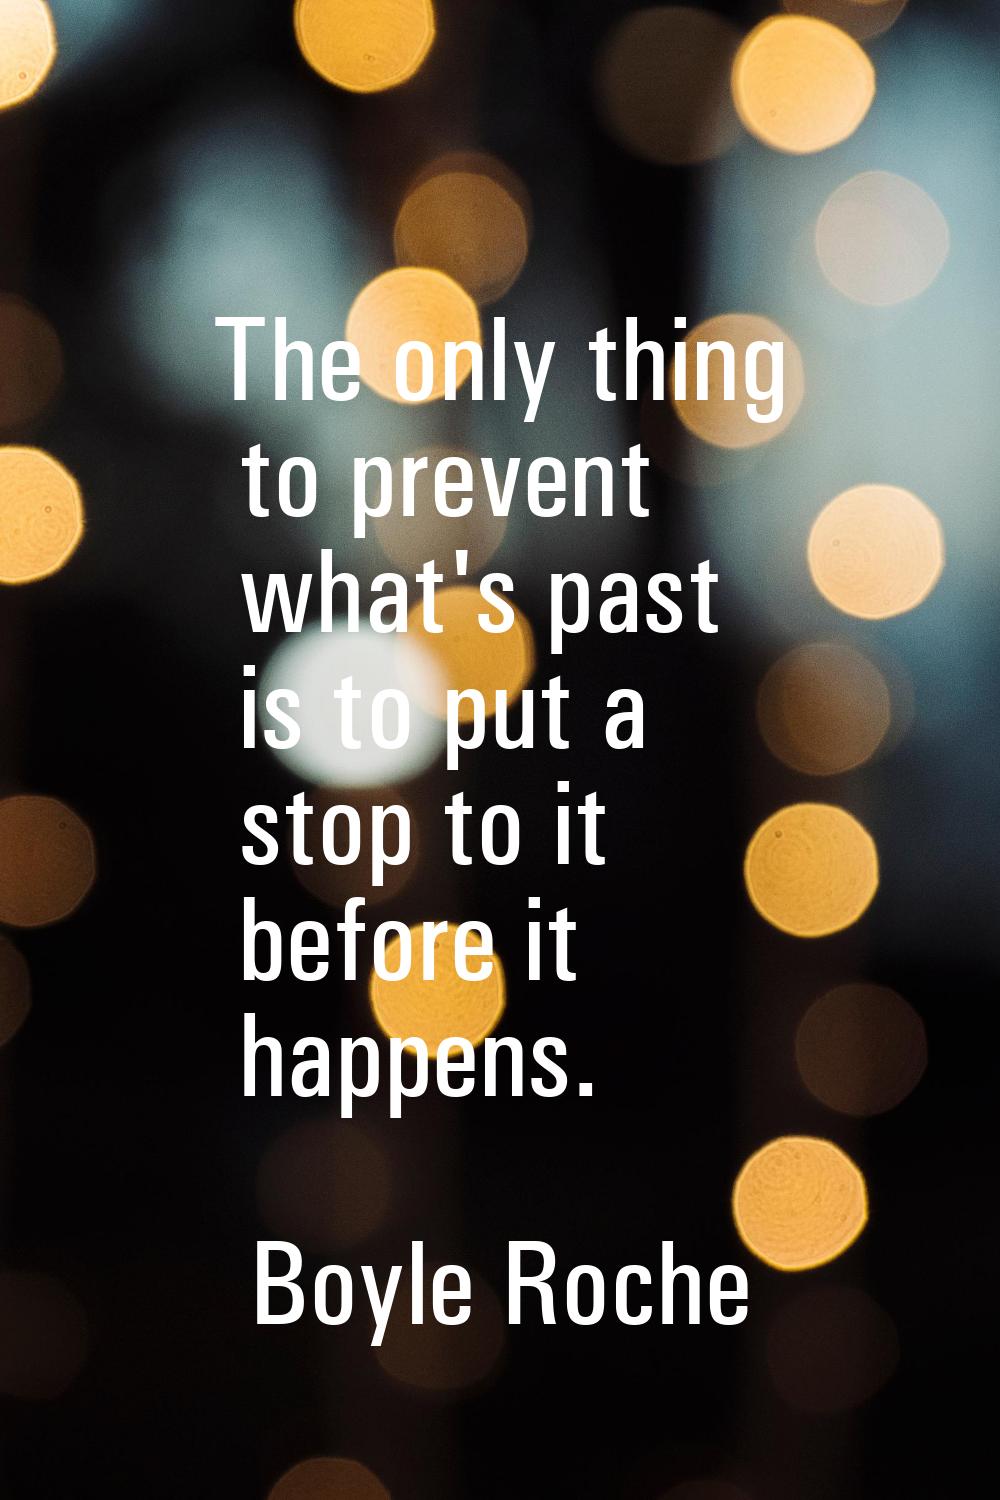 The only thing to prevent what's past is to put a stop to it before it happens.